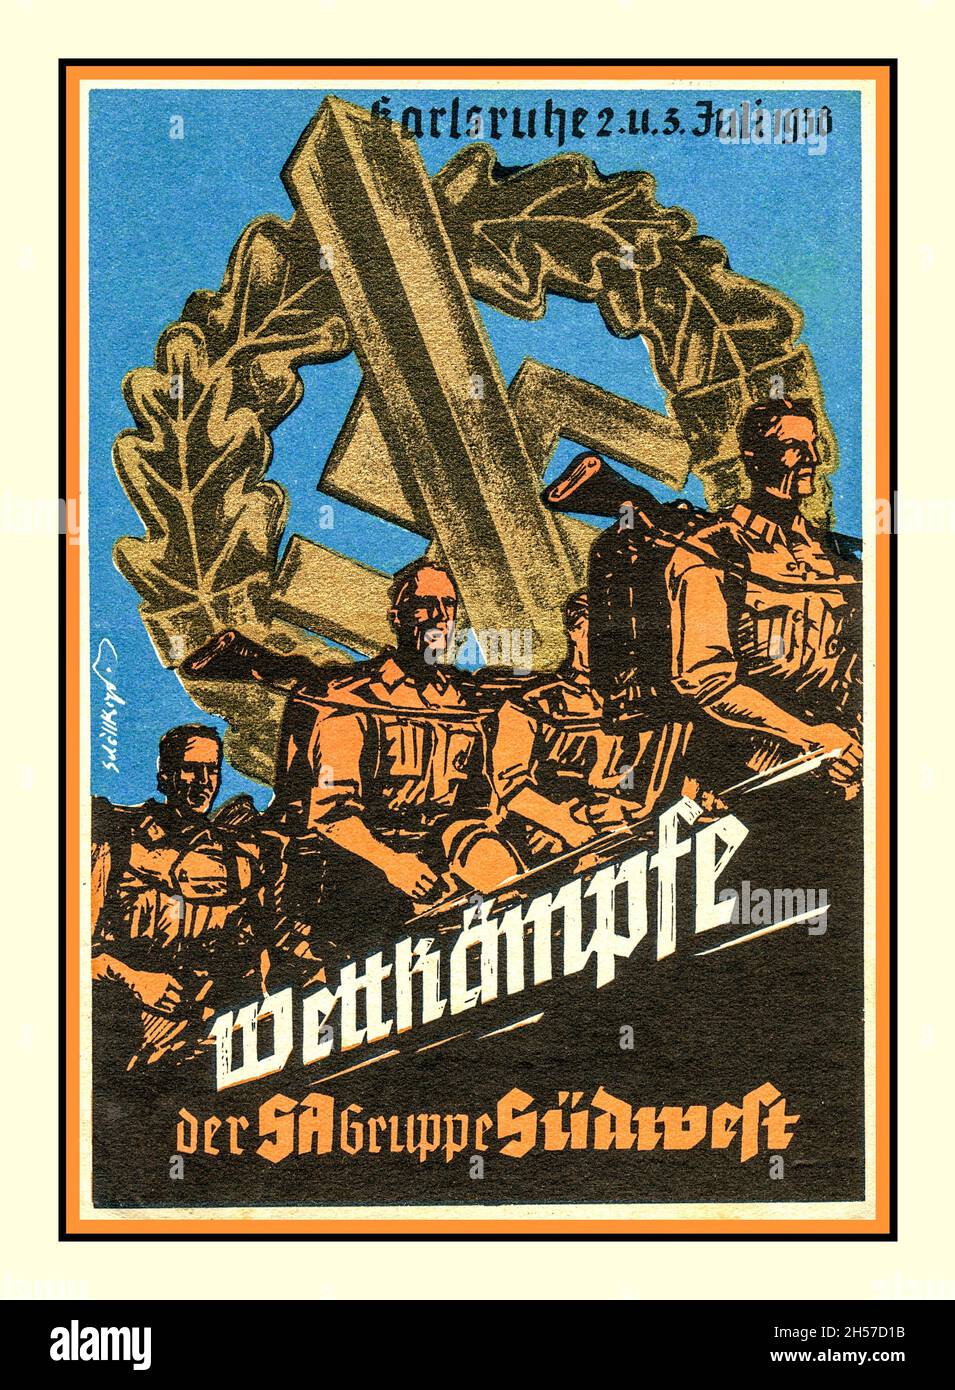 Sturmabteilung SA Nazi Propaganda Poster Card 'Parade meeting of the SA group Southwest Karlsruhe 2nd and 3rd July 1938', propaganda poster card with illustration of SA fighters marching and their Nazi badge in background Nazi GermanyThe Sturmabteilung SA; literally 'Storm Detachment') was the Nazi Party's original paramilitary wing. It played a significant role in Adolf Hitler's rise to power in the 1920s and 1930s. Its primary purposes were providing protection for Nazi rallies and assemblies Stock Photo